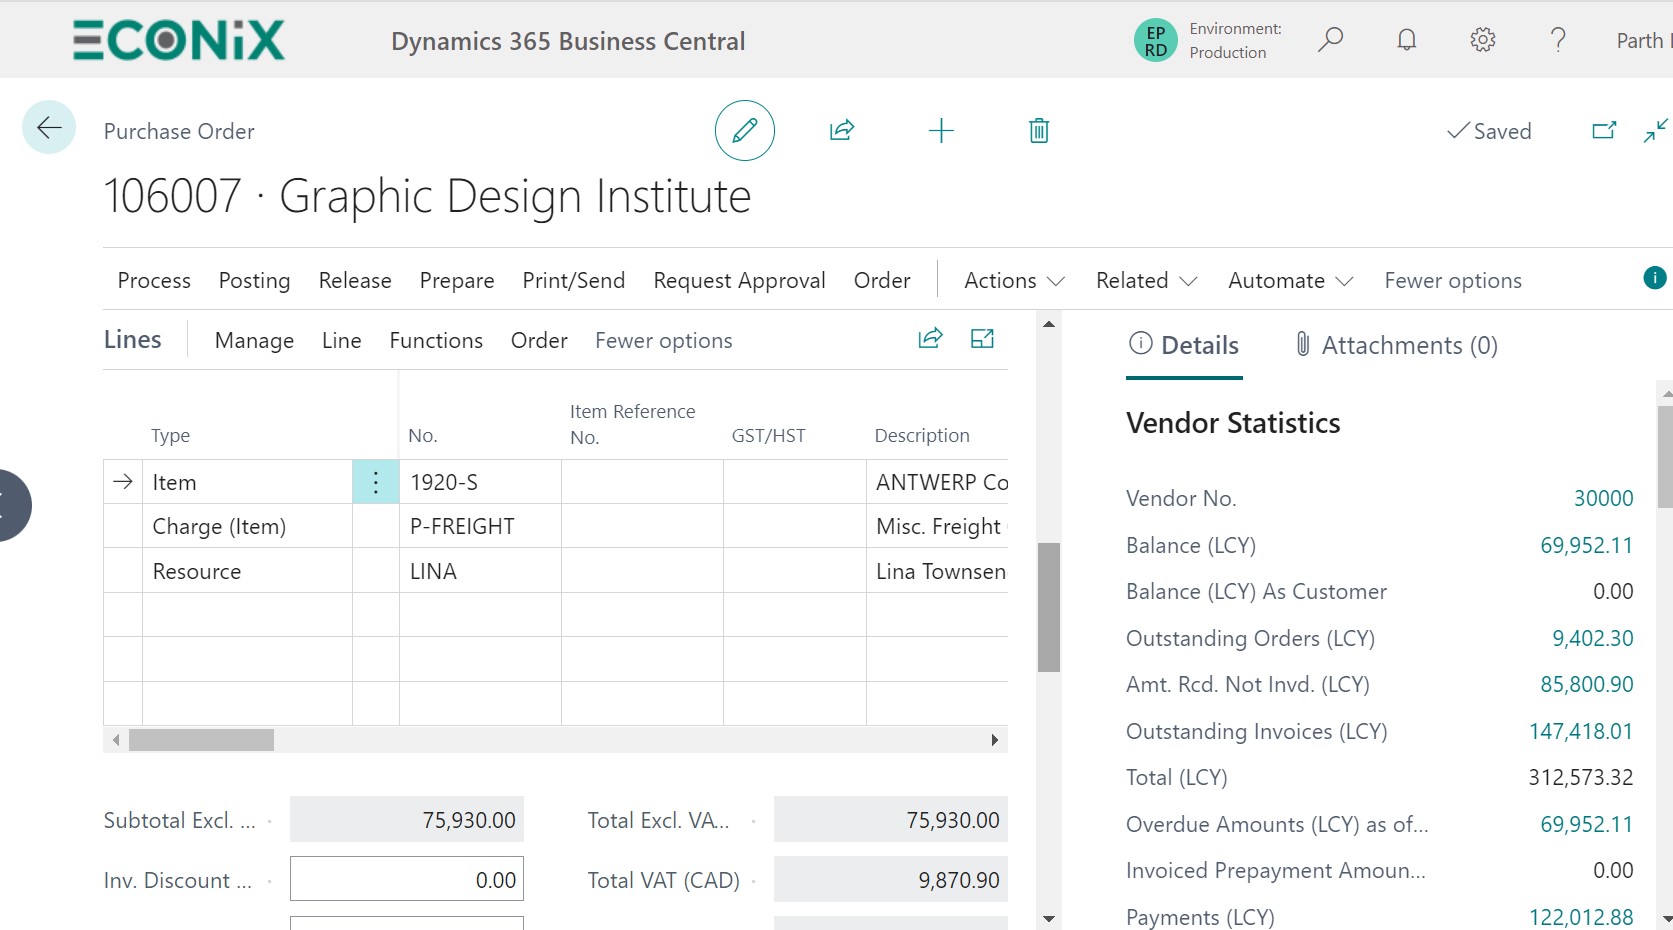 Business Functionality Supported by Dynamics 365 Business Central - Purchase